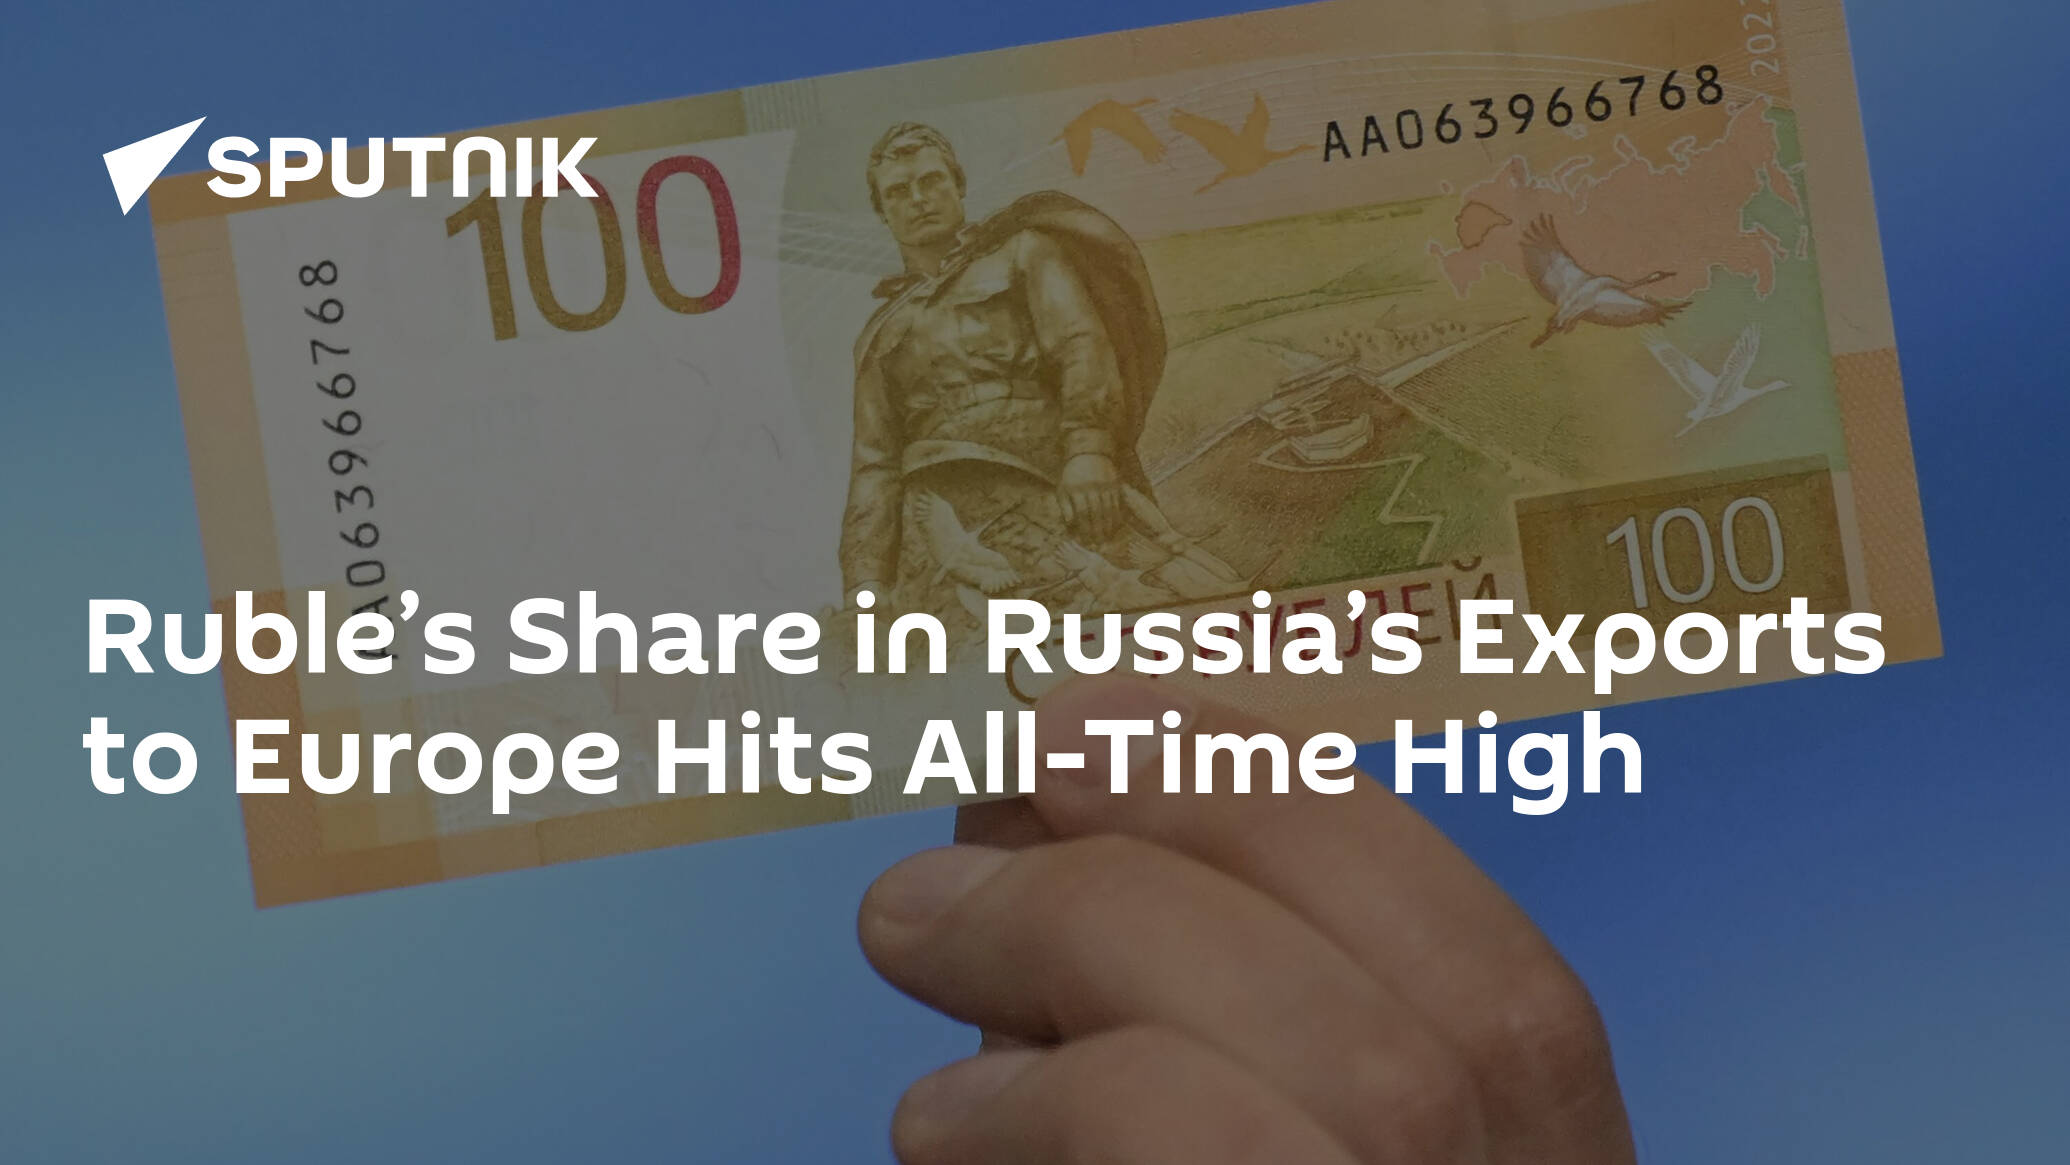 Ruble’s Share in Russia’s Exports to Europe Hits All-Time High